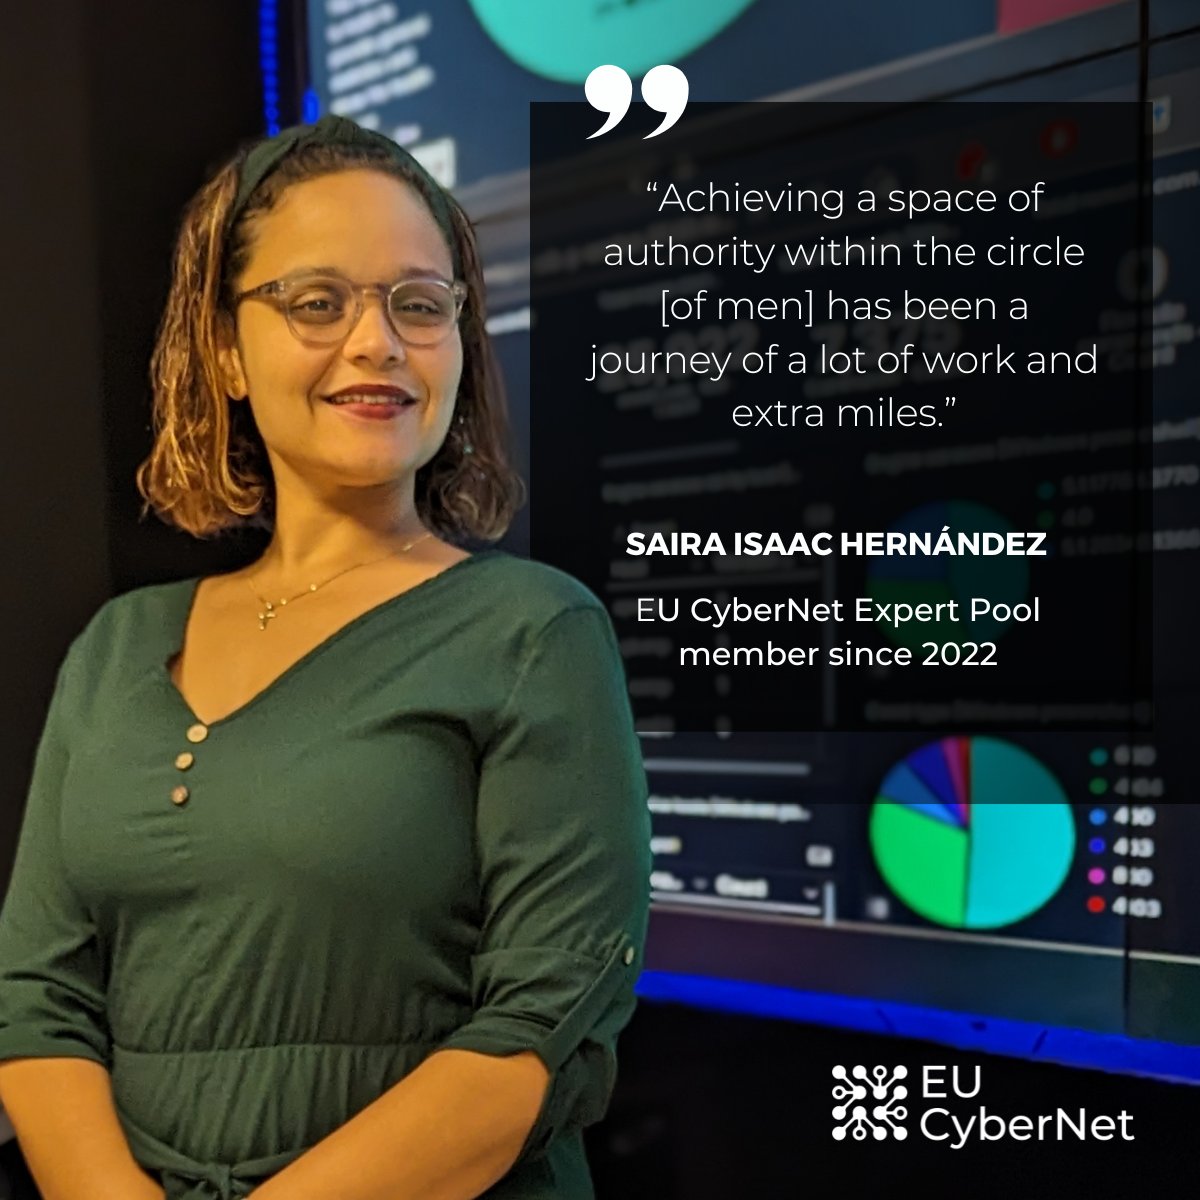 🥁New #EUCyberNet mini-interview series has got an inspirational start with our amazing expert @SairaIsaac Read the whole interview here 👉 eucybernet.eu/saira-isaac-he… #cybersecurity #EUForeignPolicy